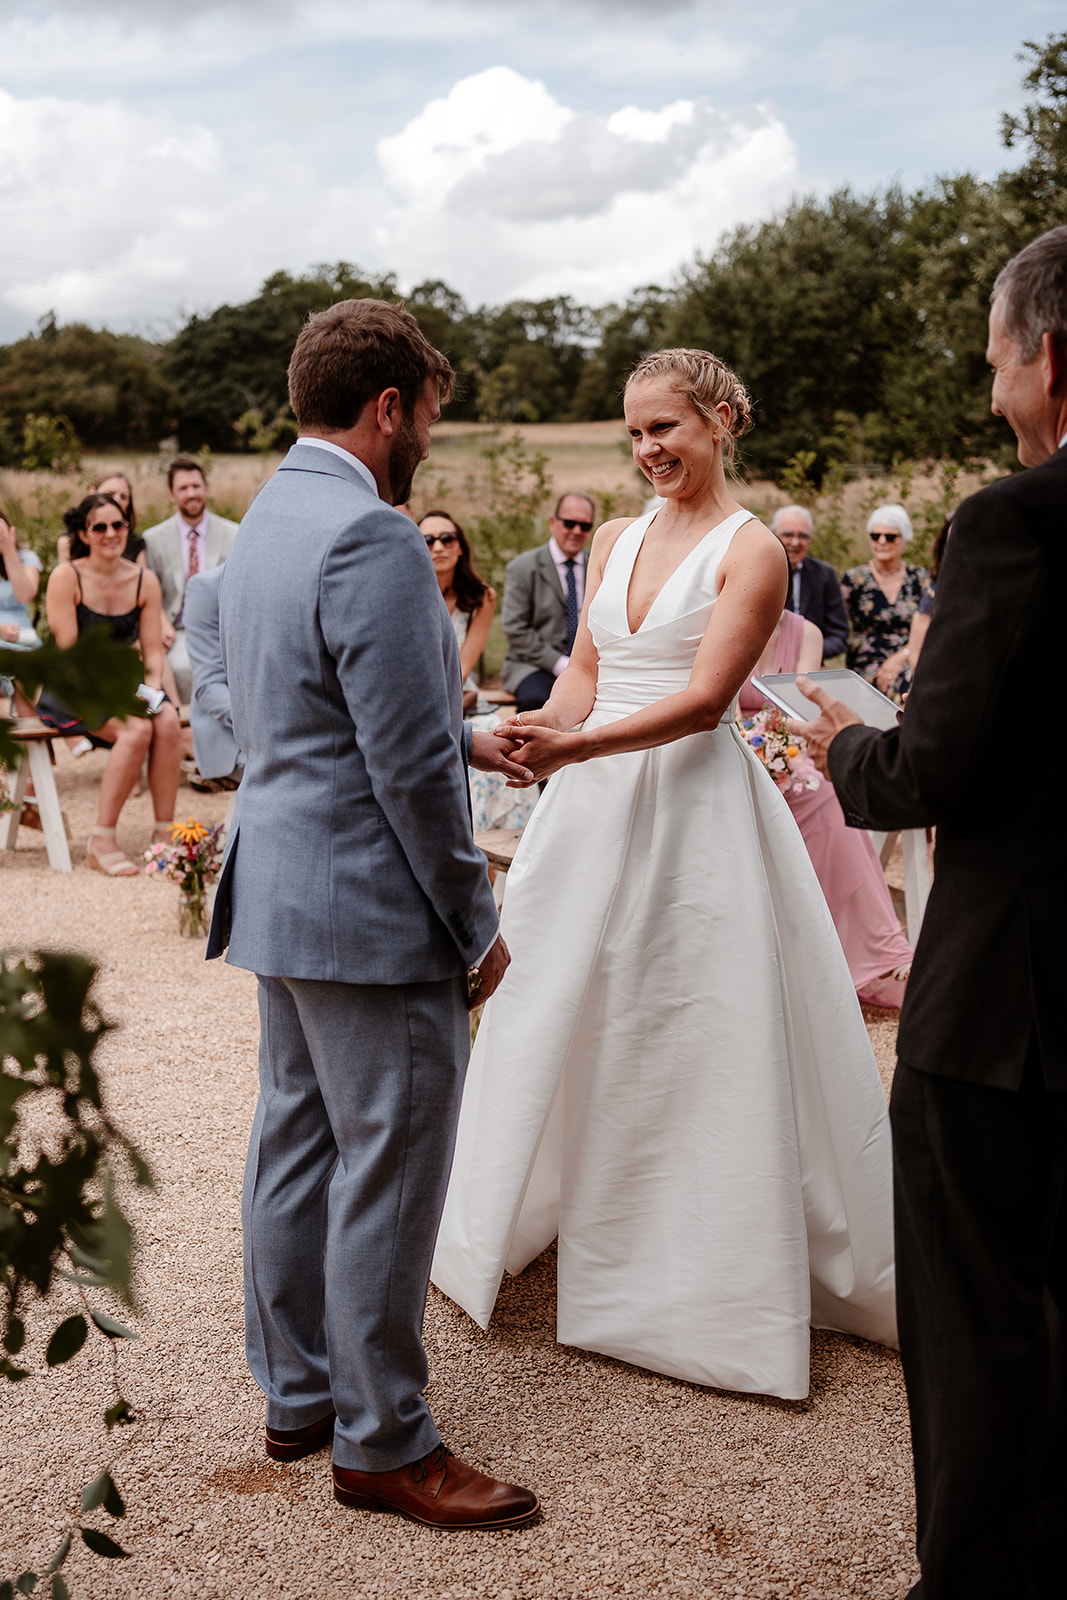 Bride puts a wedding ring on her groom at a summer wedding at Silchester Farm